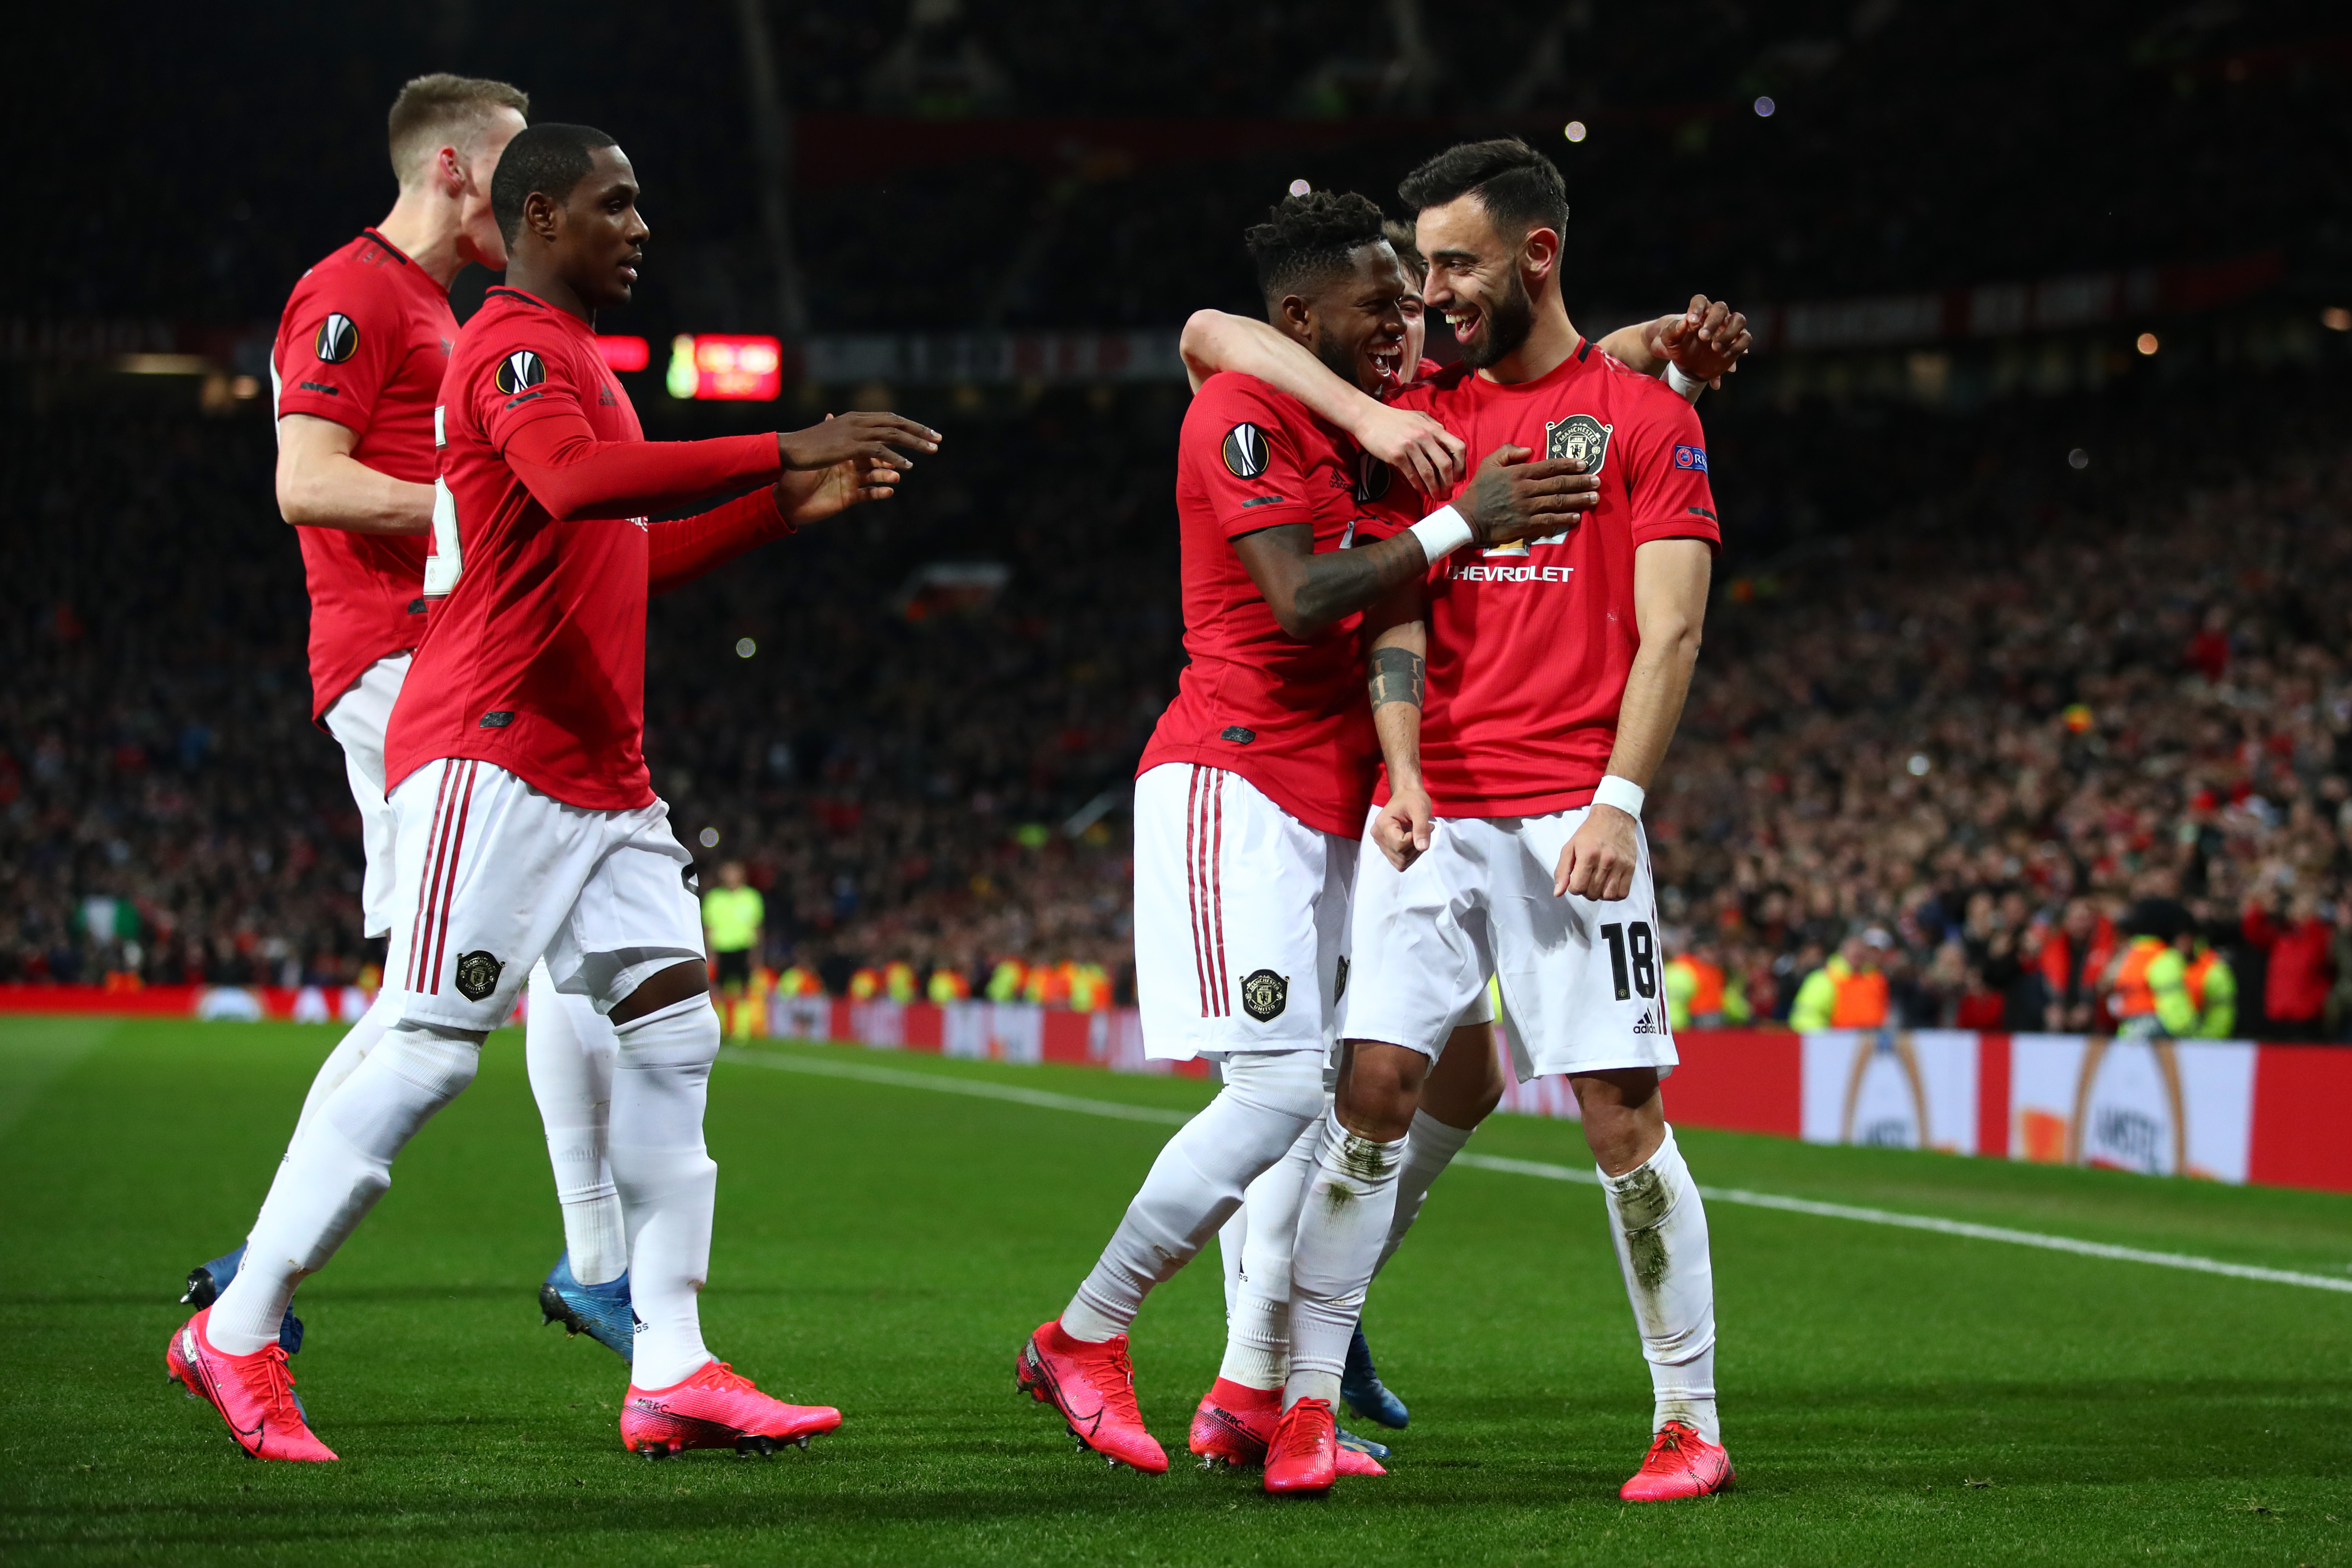 Bruno Fernandes played a massive role as United finished second in the league last season (Photo by Clive Brunskill/Getty Images)